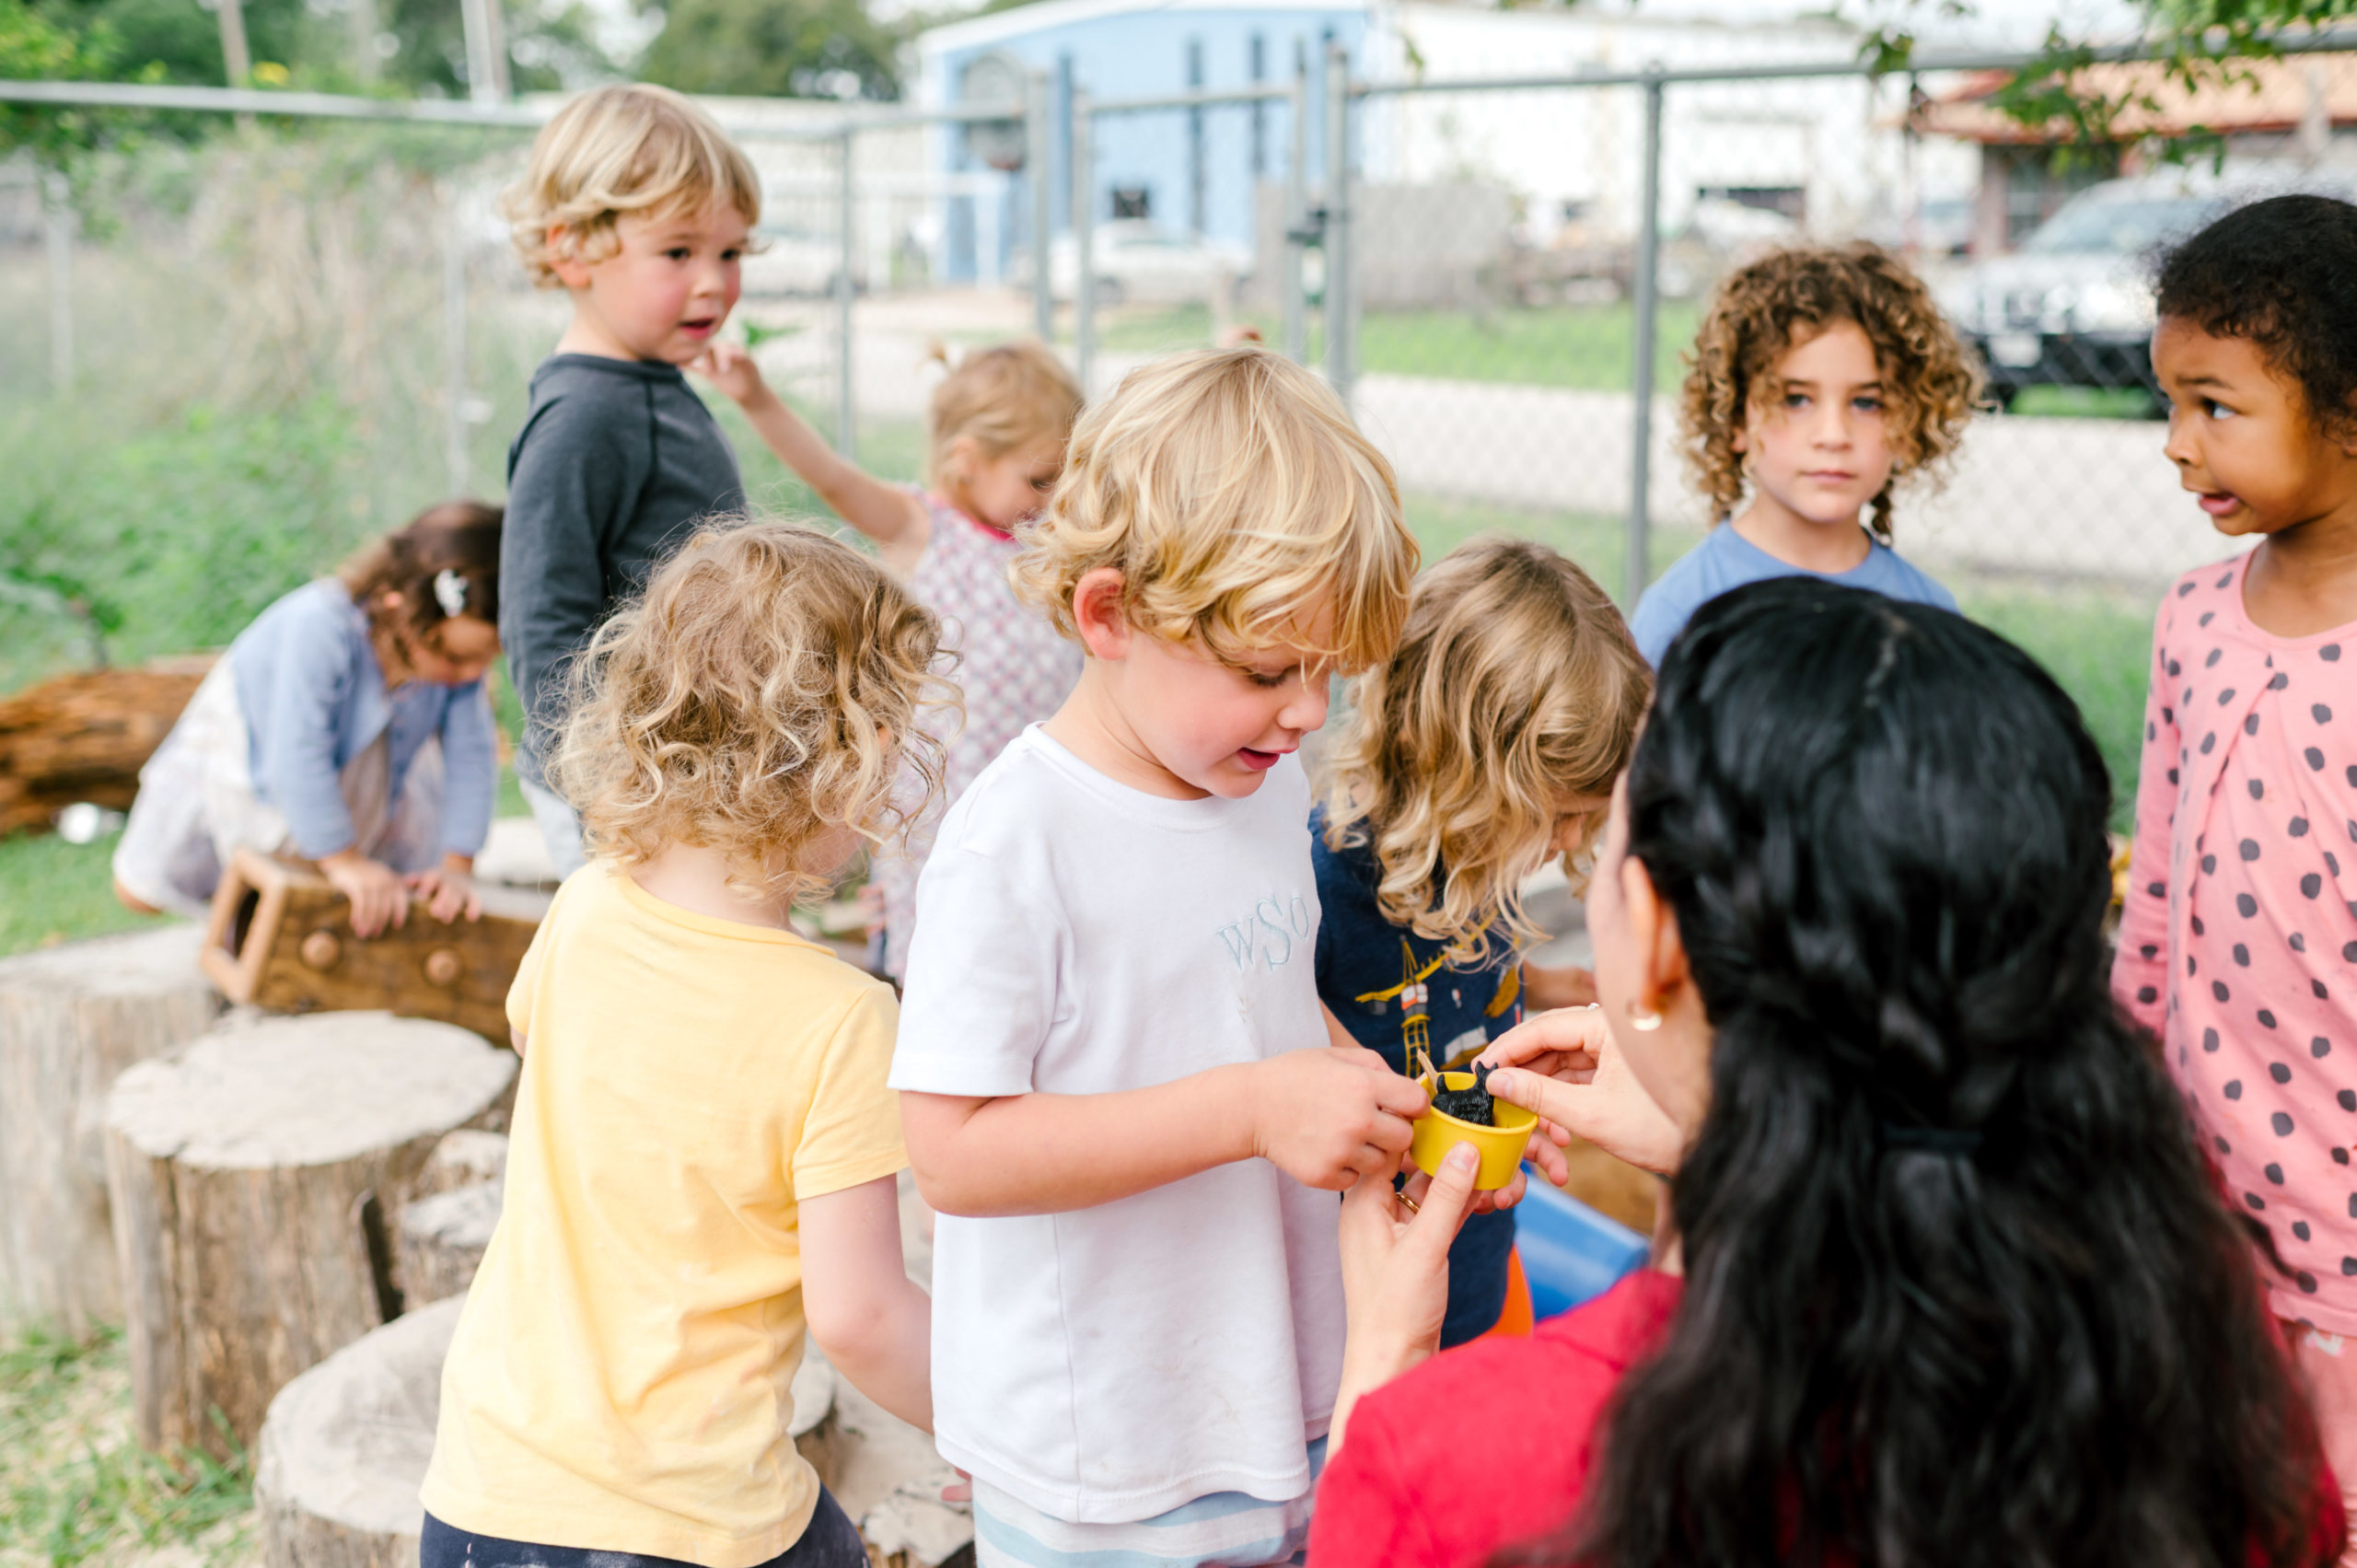 Photo of woman child development coach in a beautiful red dress interacting with kids on a playground outside  during her branding photography session
